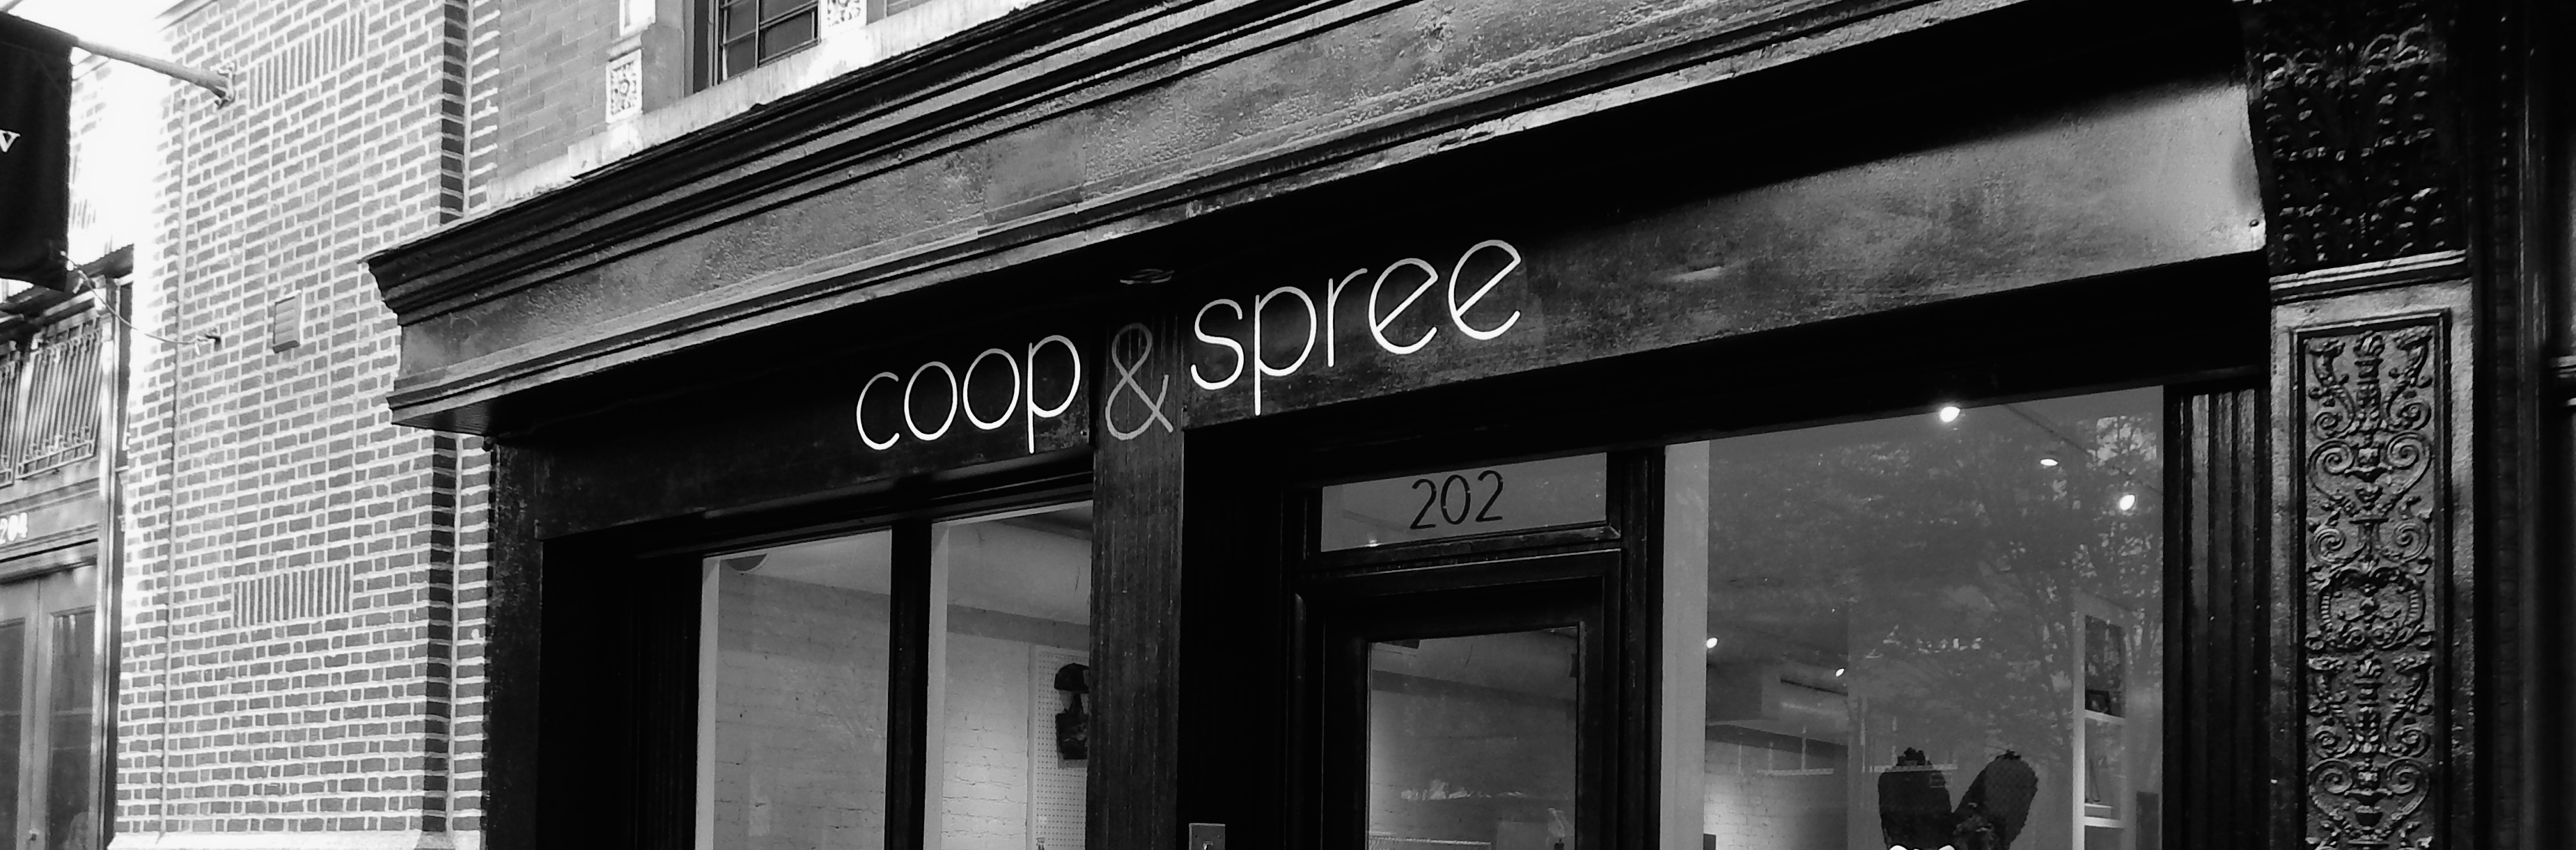 About Page  coop & spree